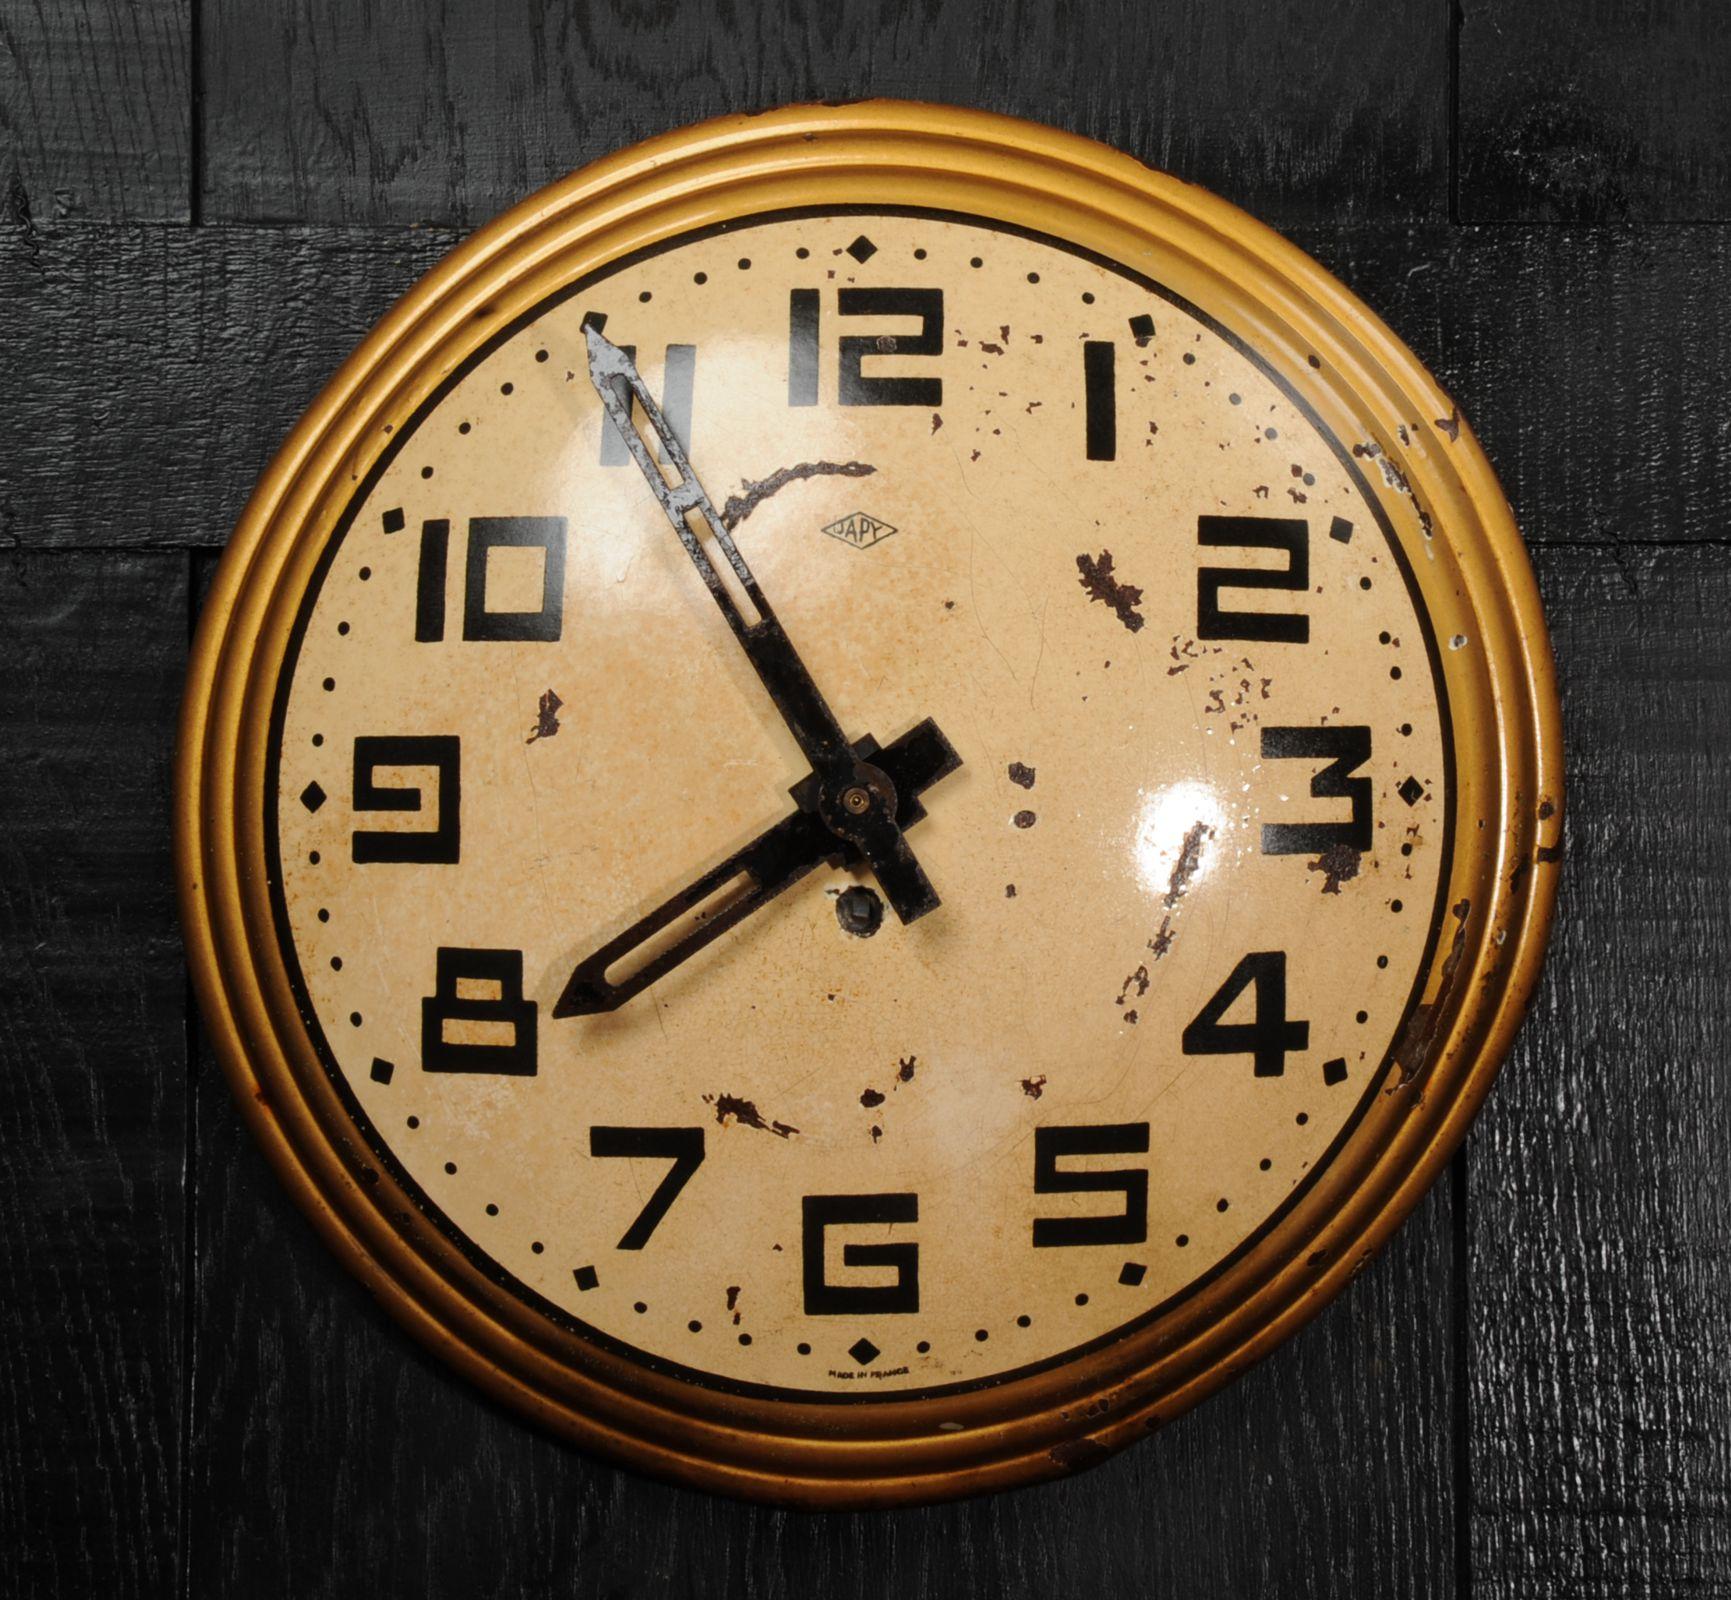 A wonderful early 20th century gold tole wall clock with a beautiful patination after years of neglect. The dark and light gold original finish is speckled with rust. Originally a mechanical movement by the famous maker Japy Freres, this was mostly